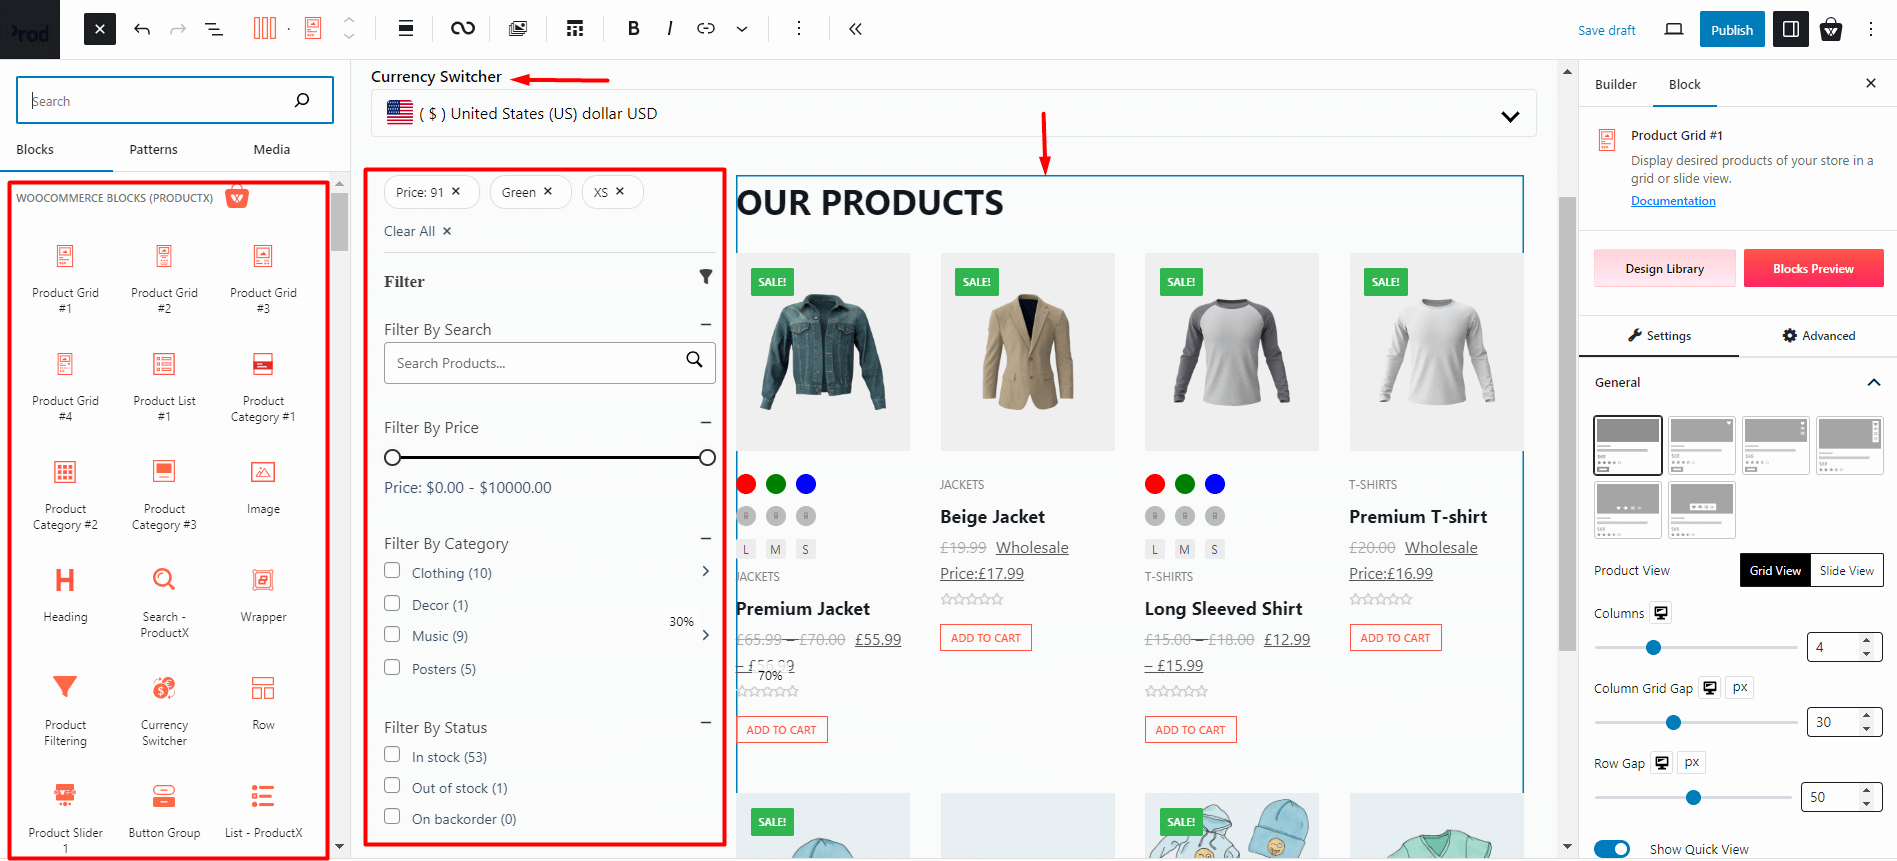 Bring blocks to the shop editor page